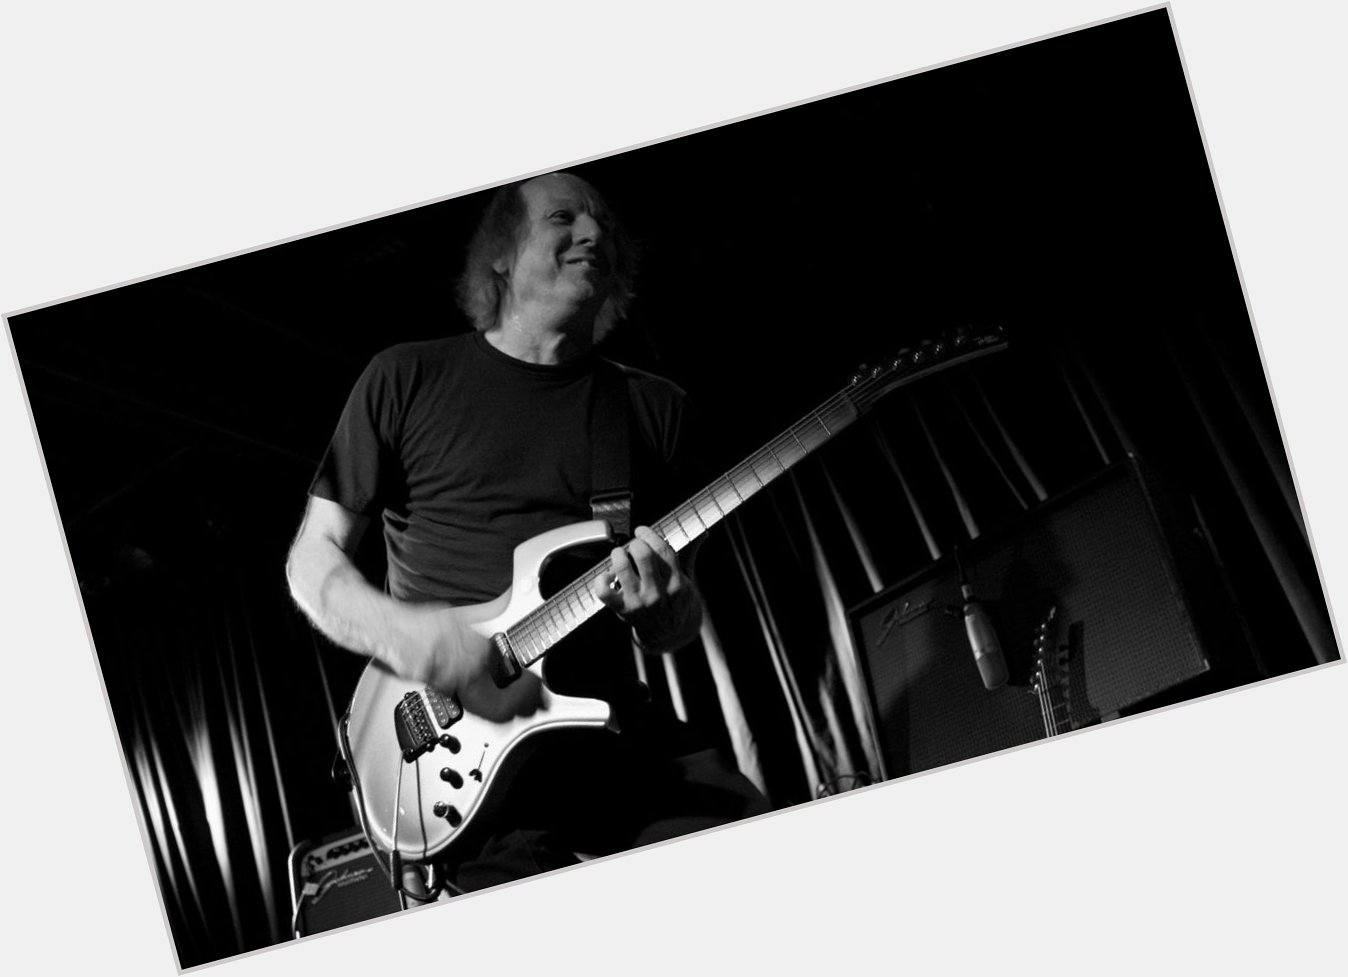 Happy birthday to Adrian Belew, who is 68 today! 